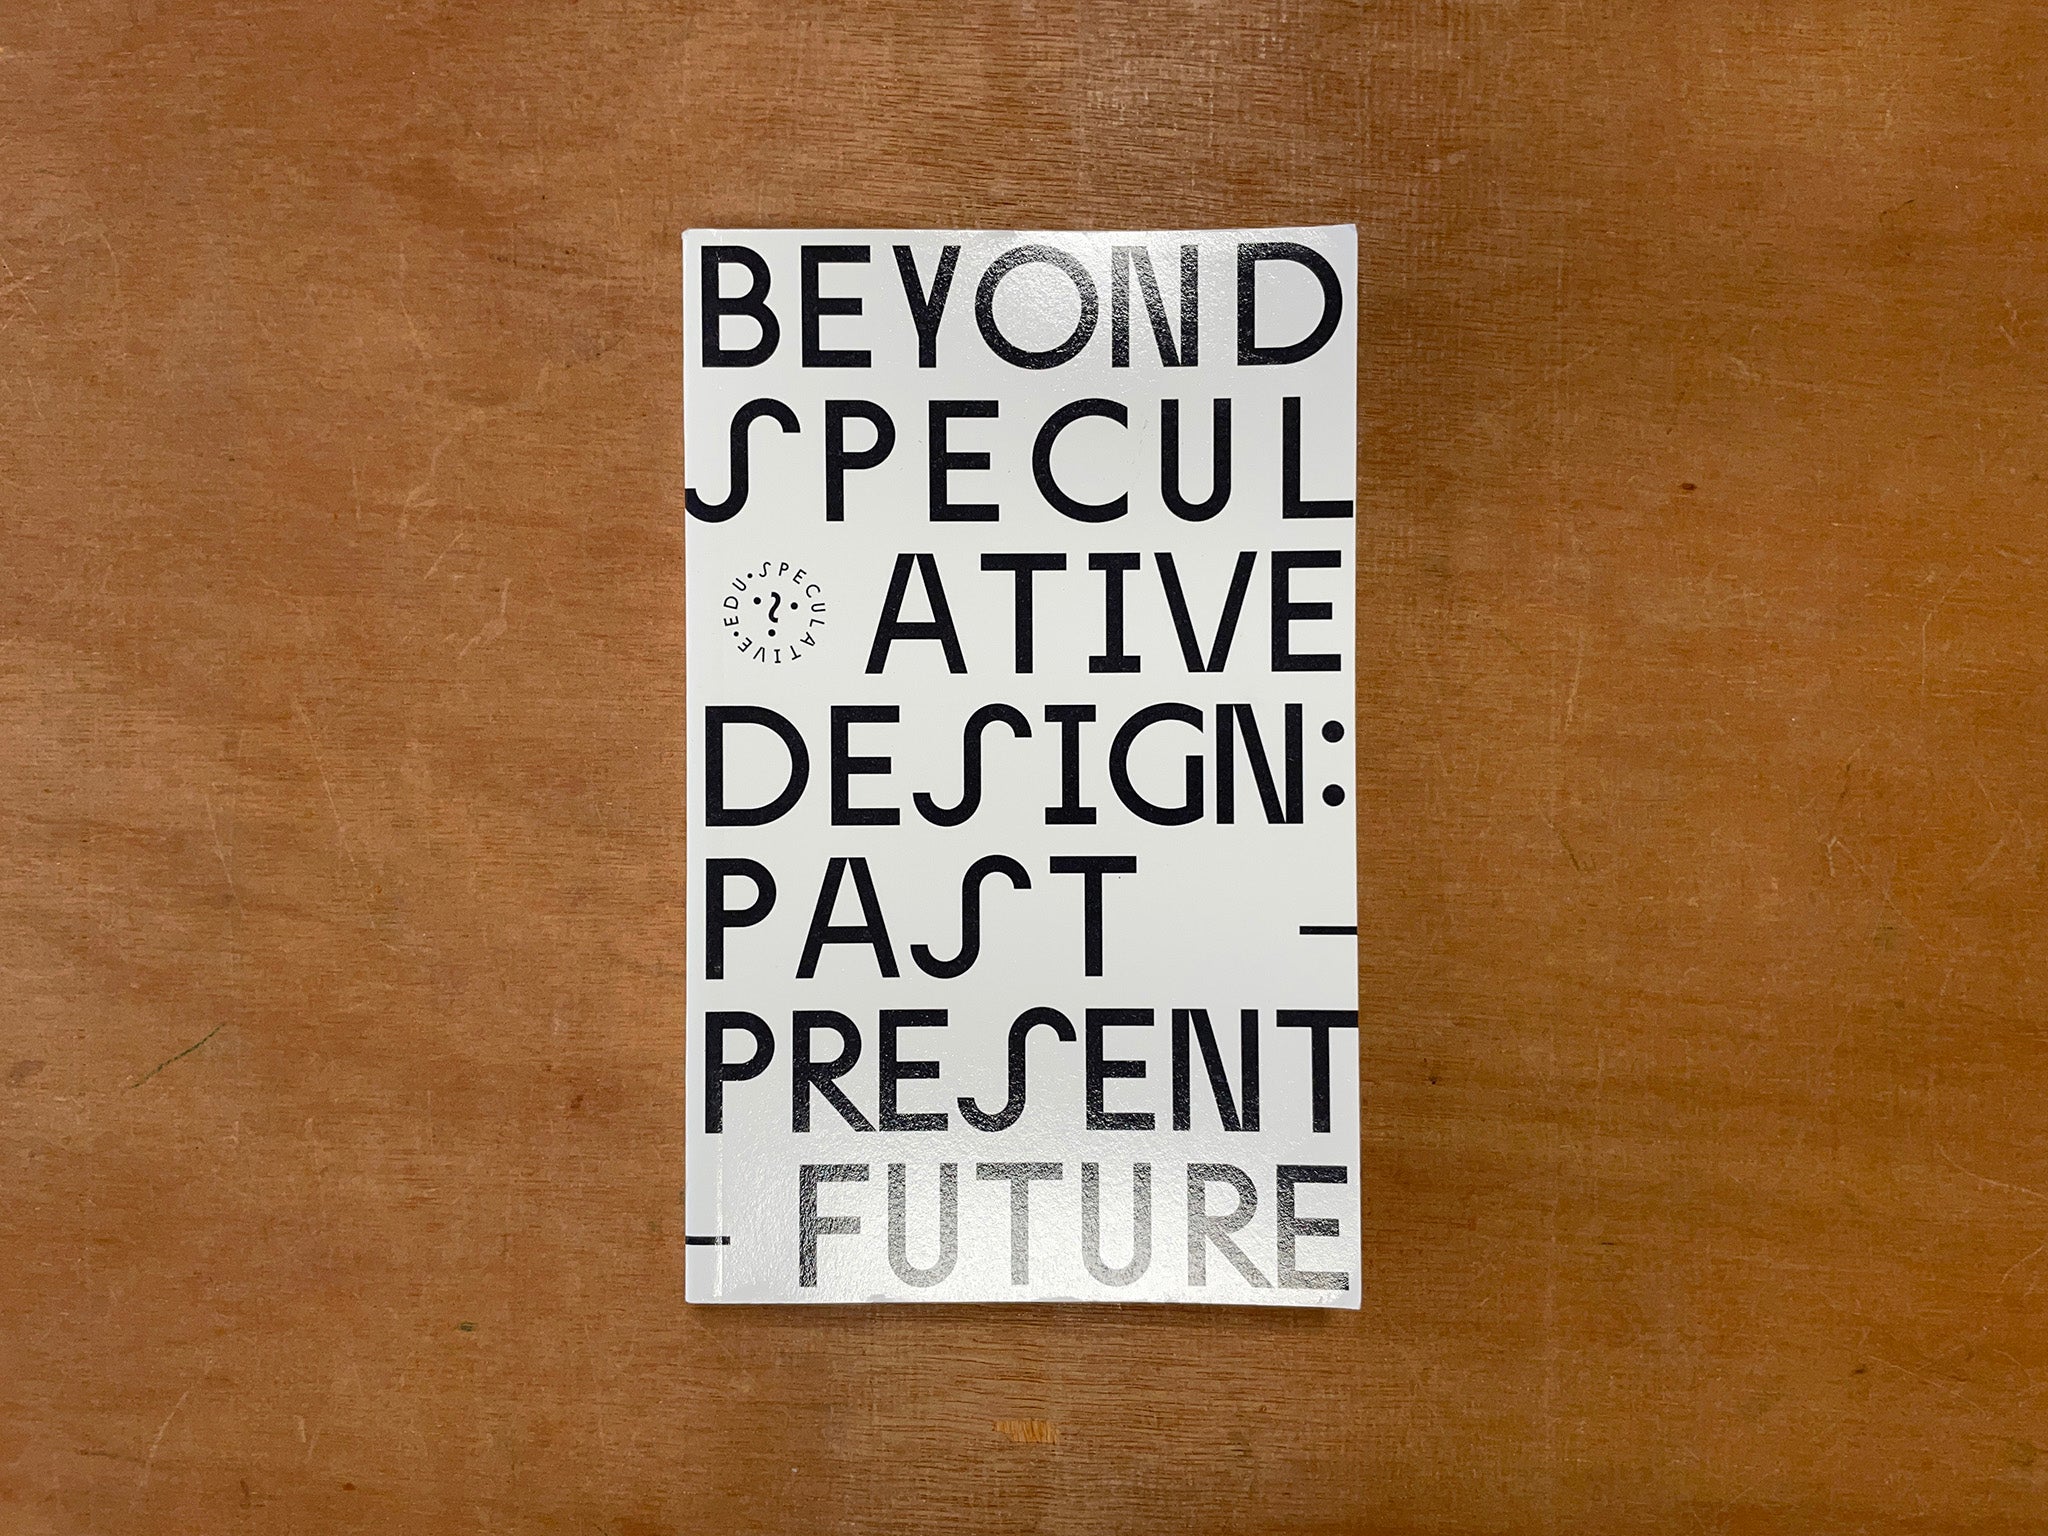 BEYOND SPECULATIVE DESIGN: PAST-PRESENT-FUTURE by Various Artists